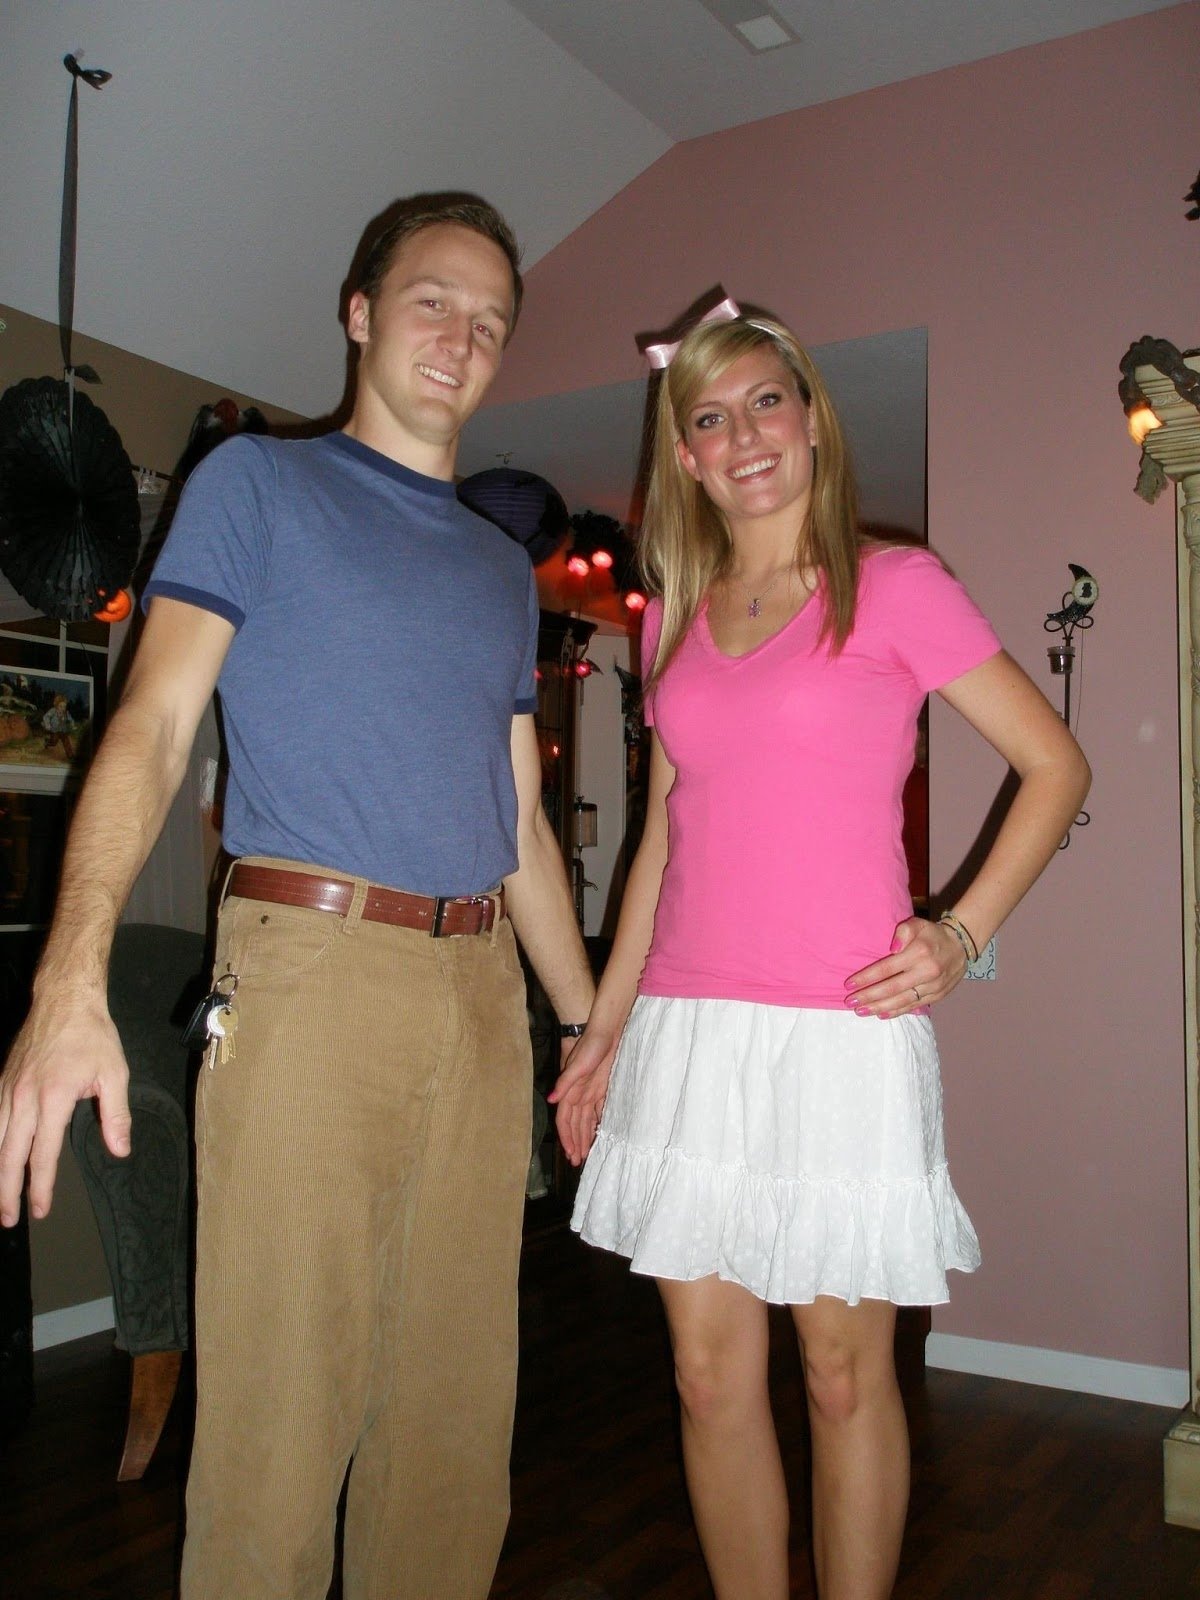 The Cutest & Easiest Couple Halloween Costumes